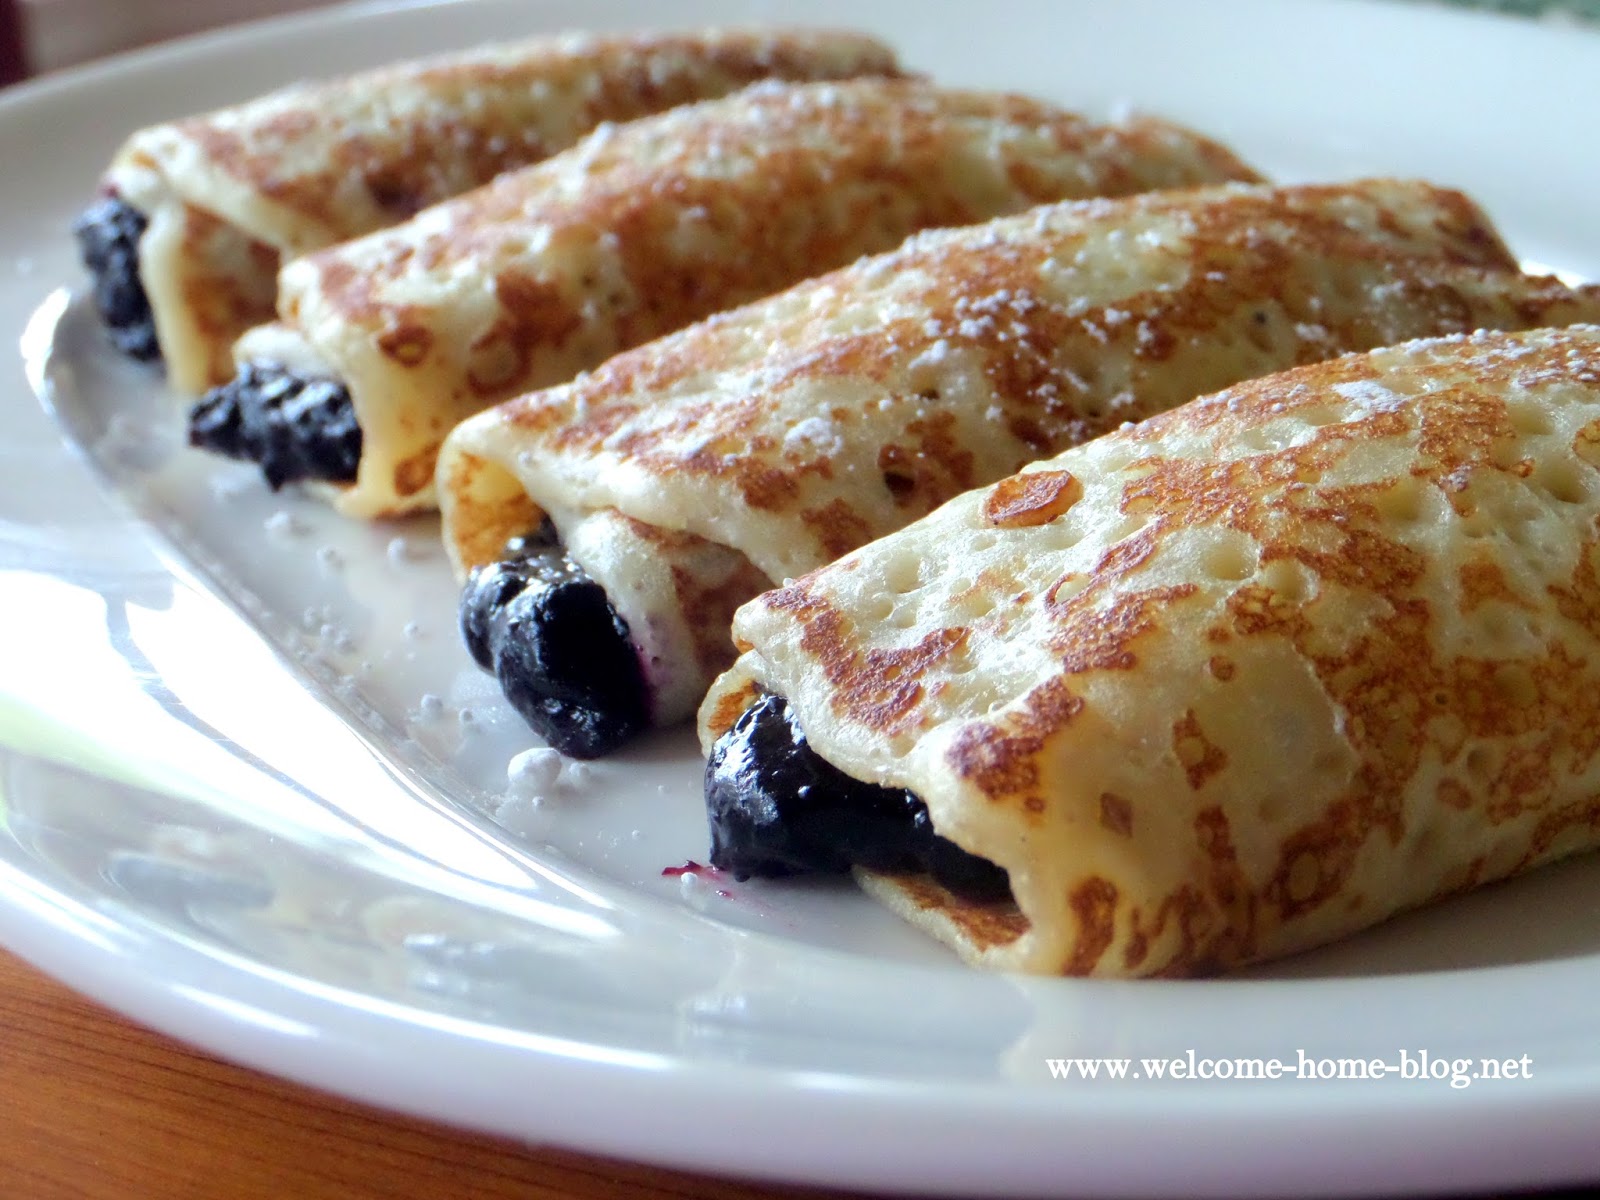 Welcome Home Blog: Vanilla Crepes with Warm Blueberry Compote